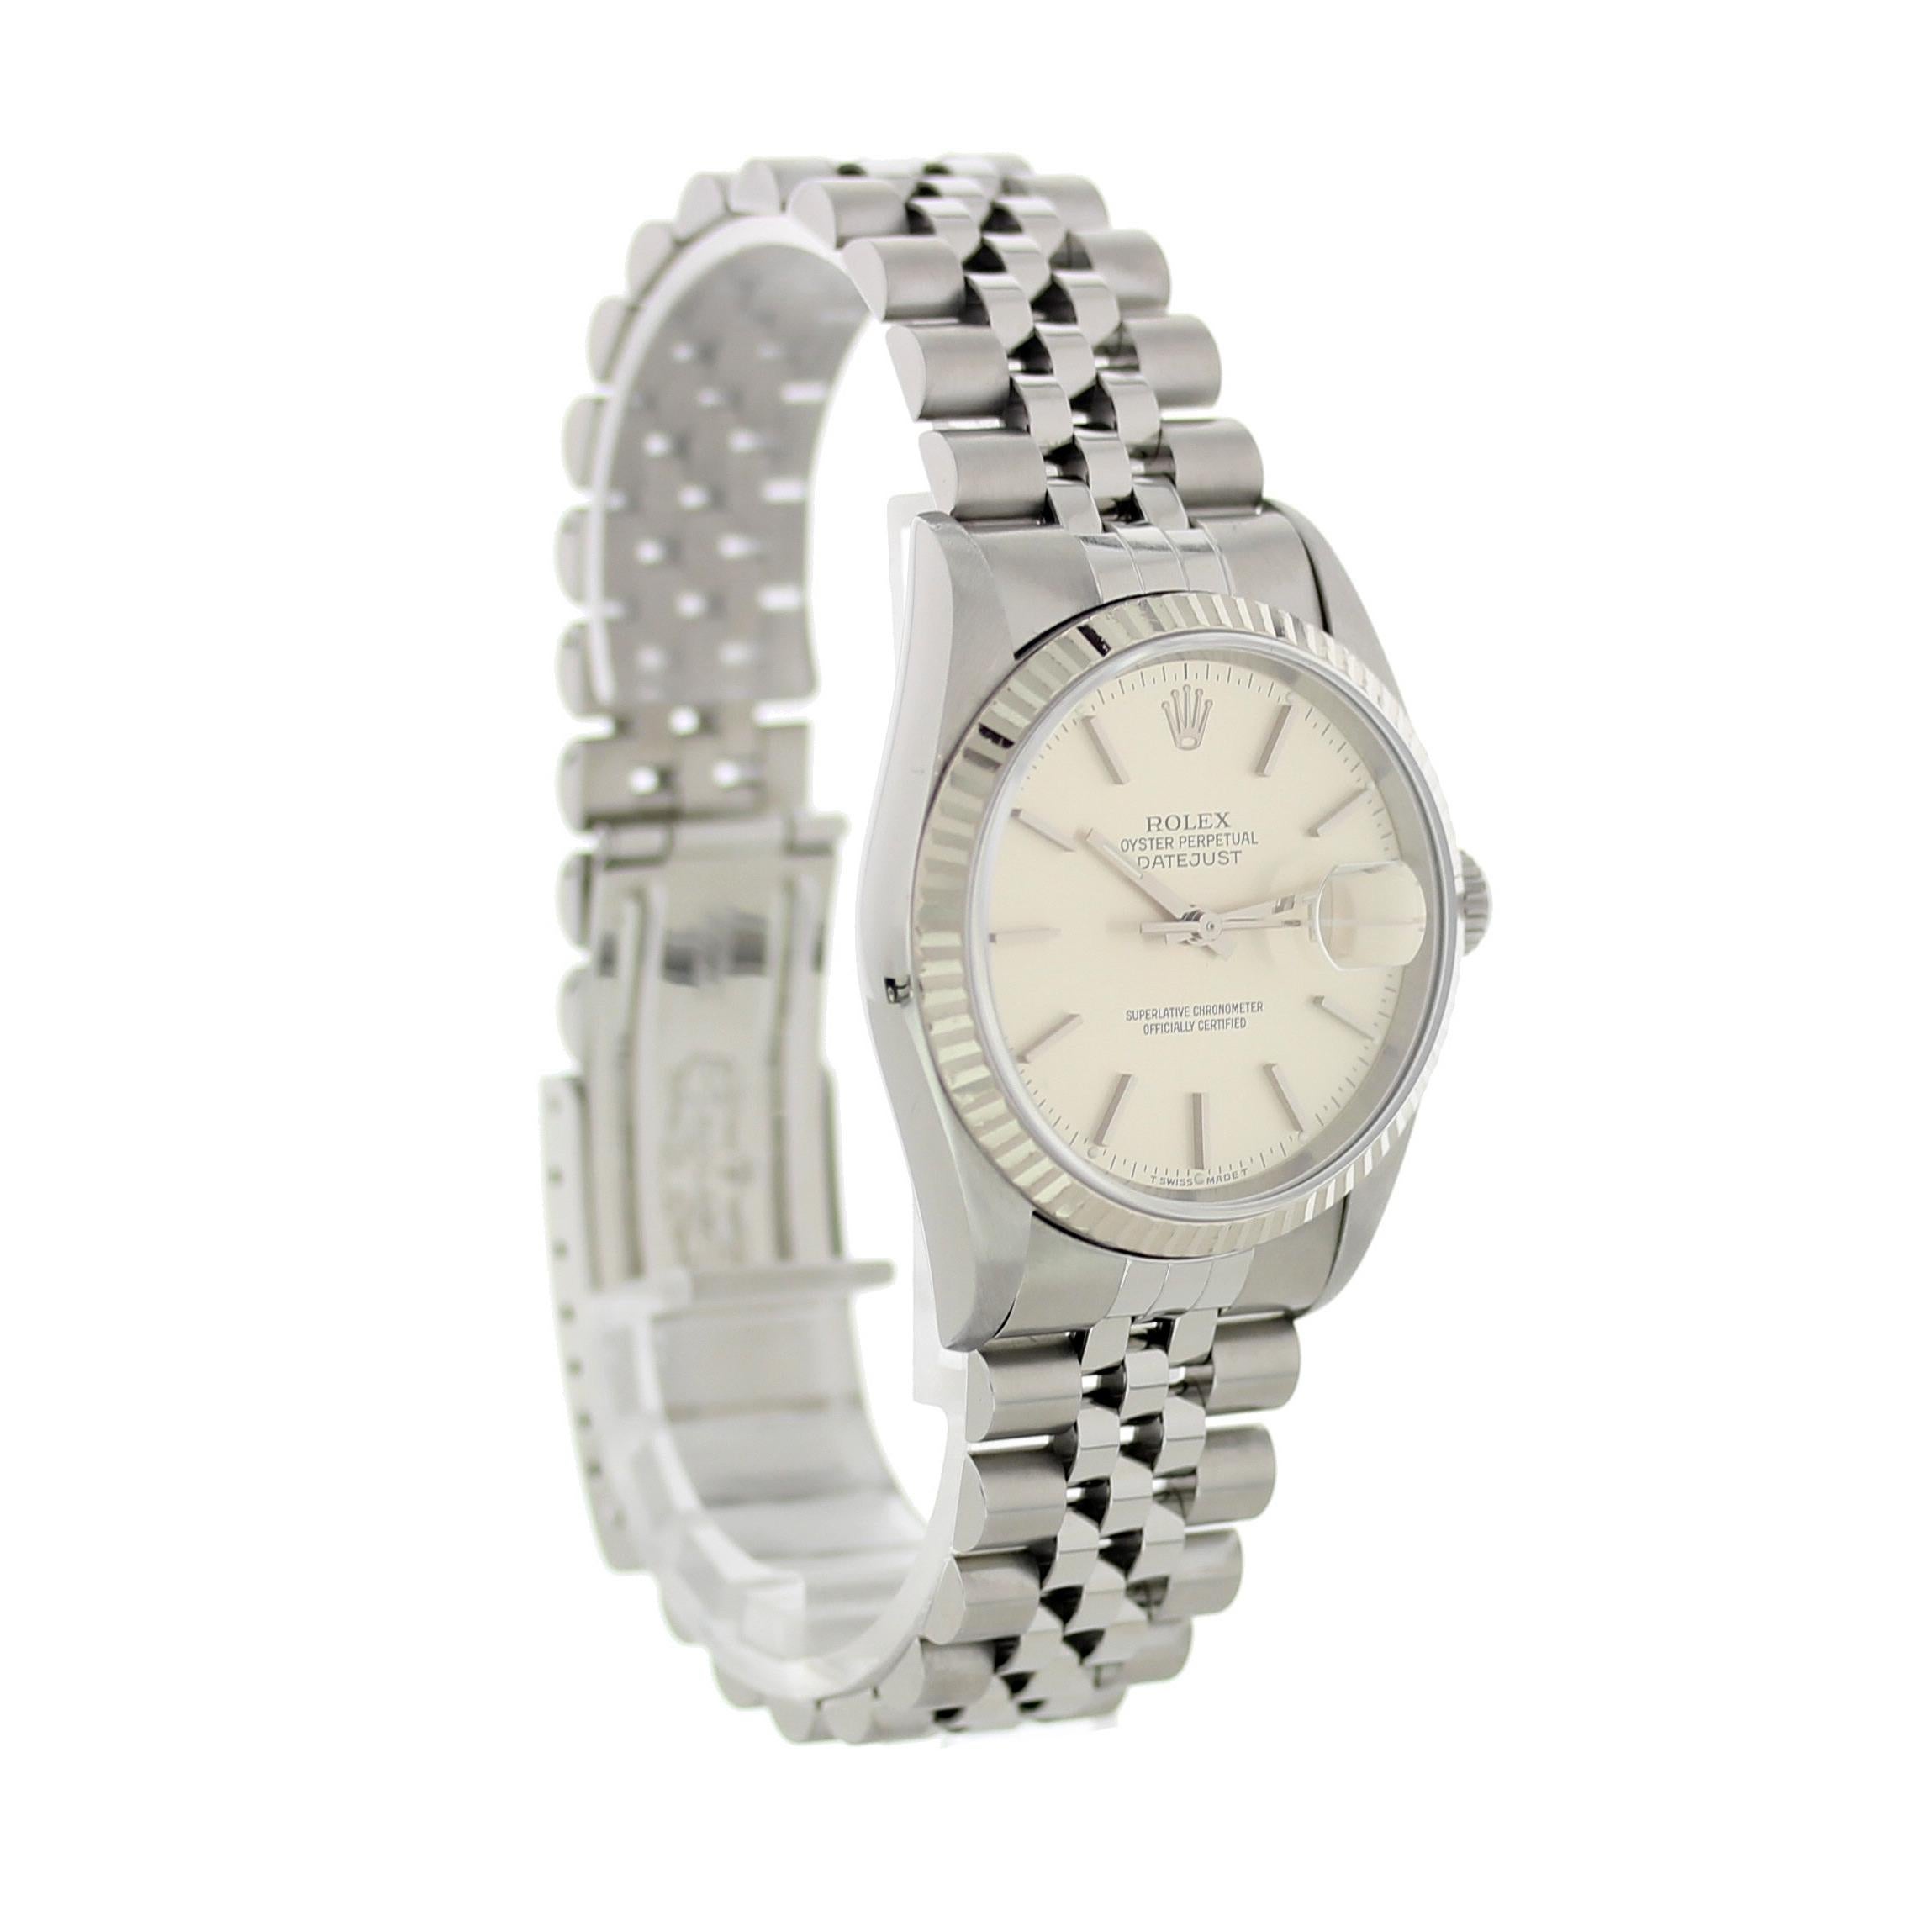 Rolex Oyster Perpetual Datejust 16234 Men's Watch In Excellent Condition For Sale In New York, NY